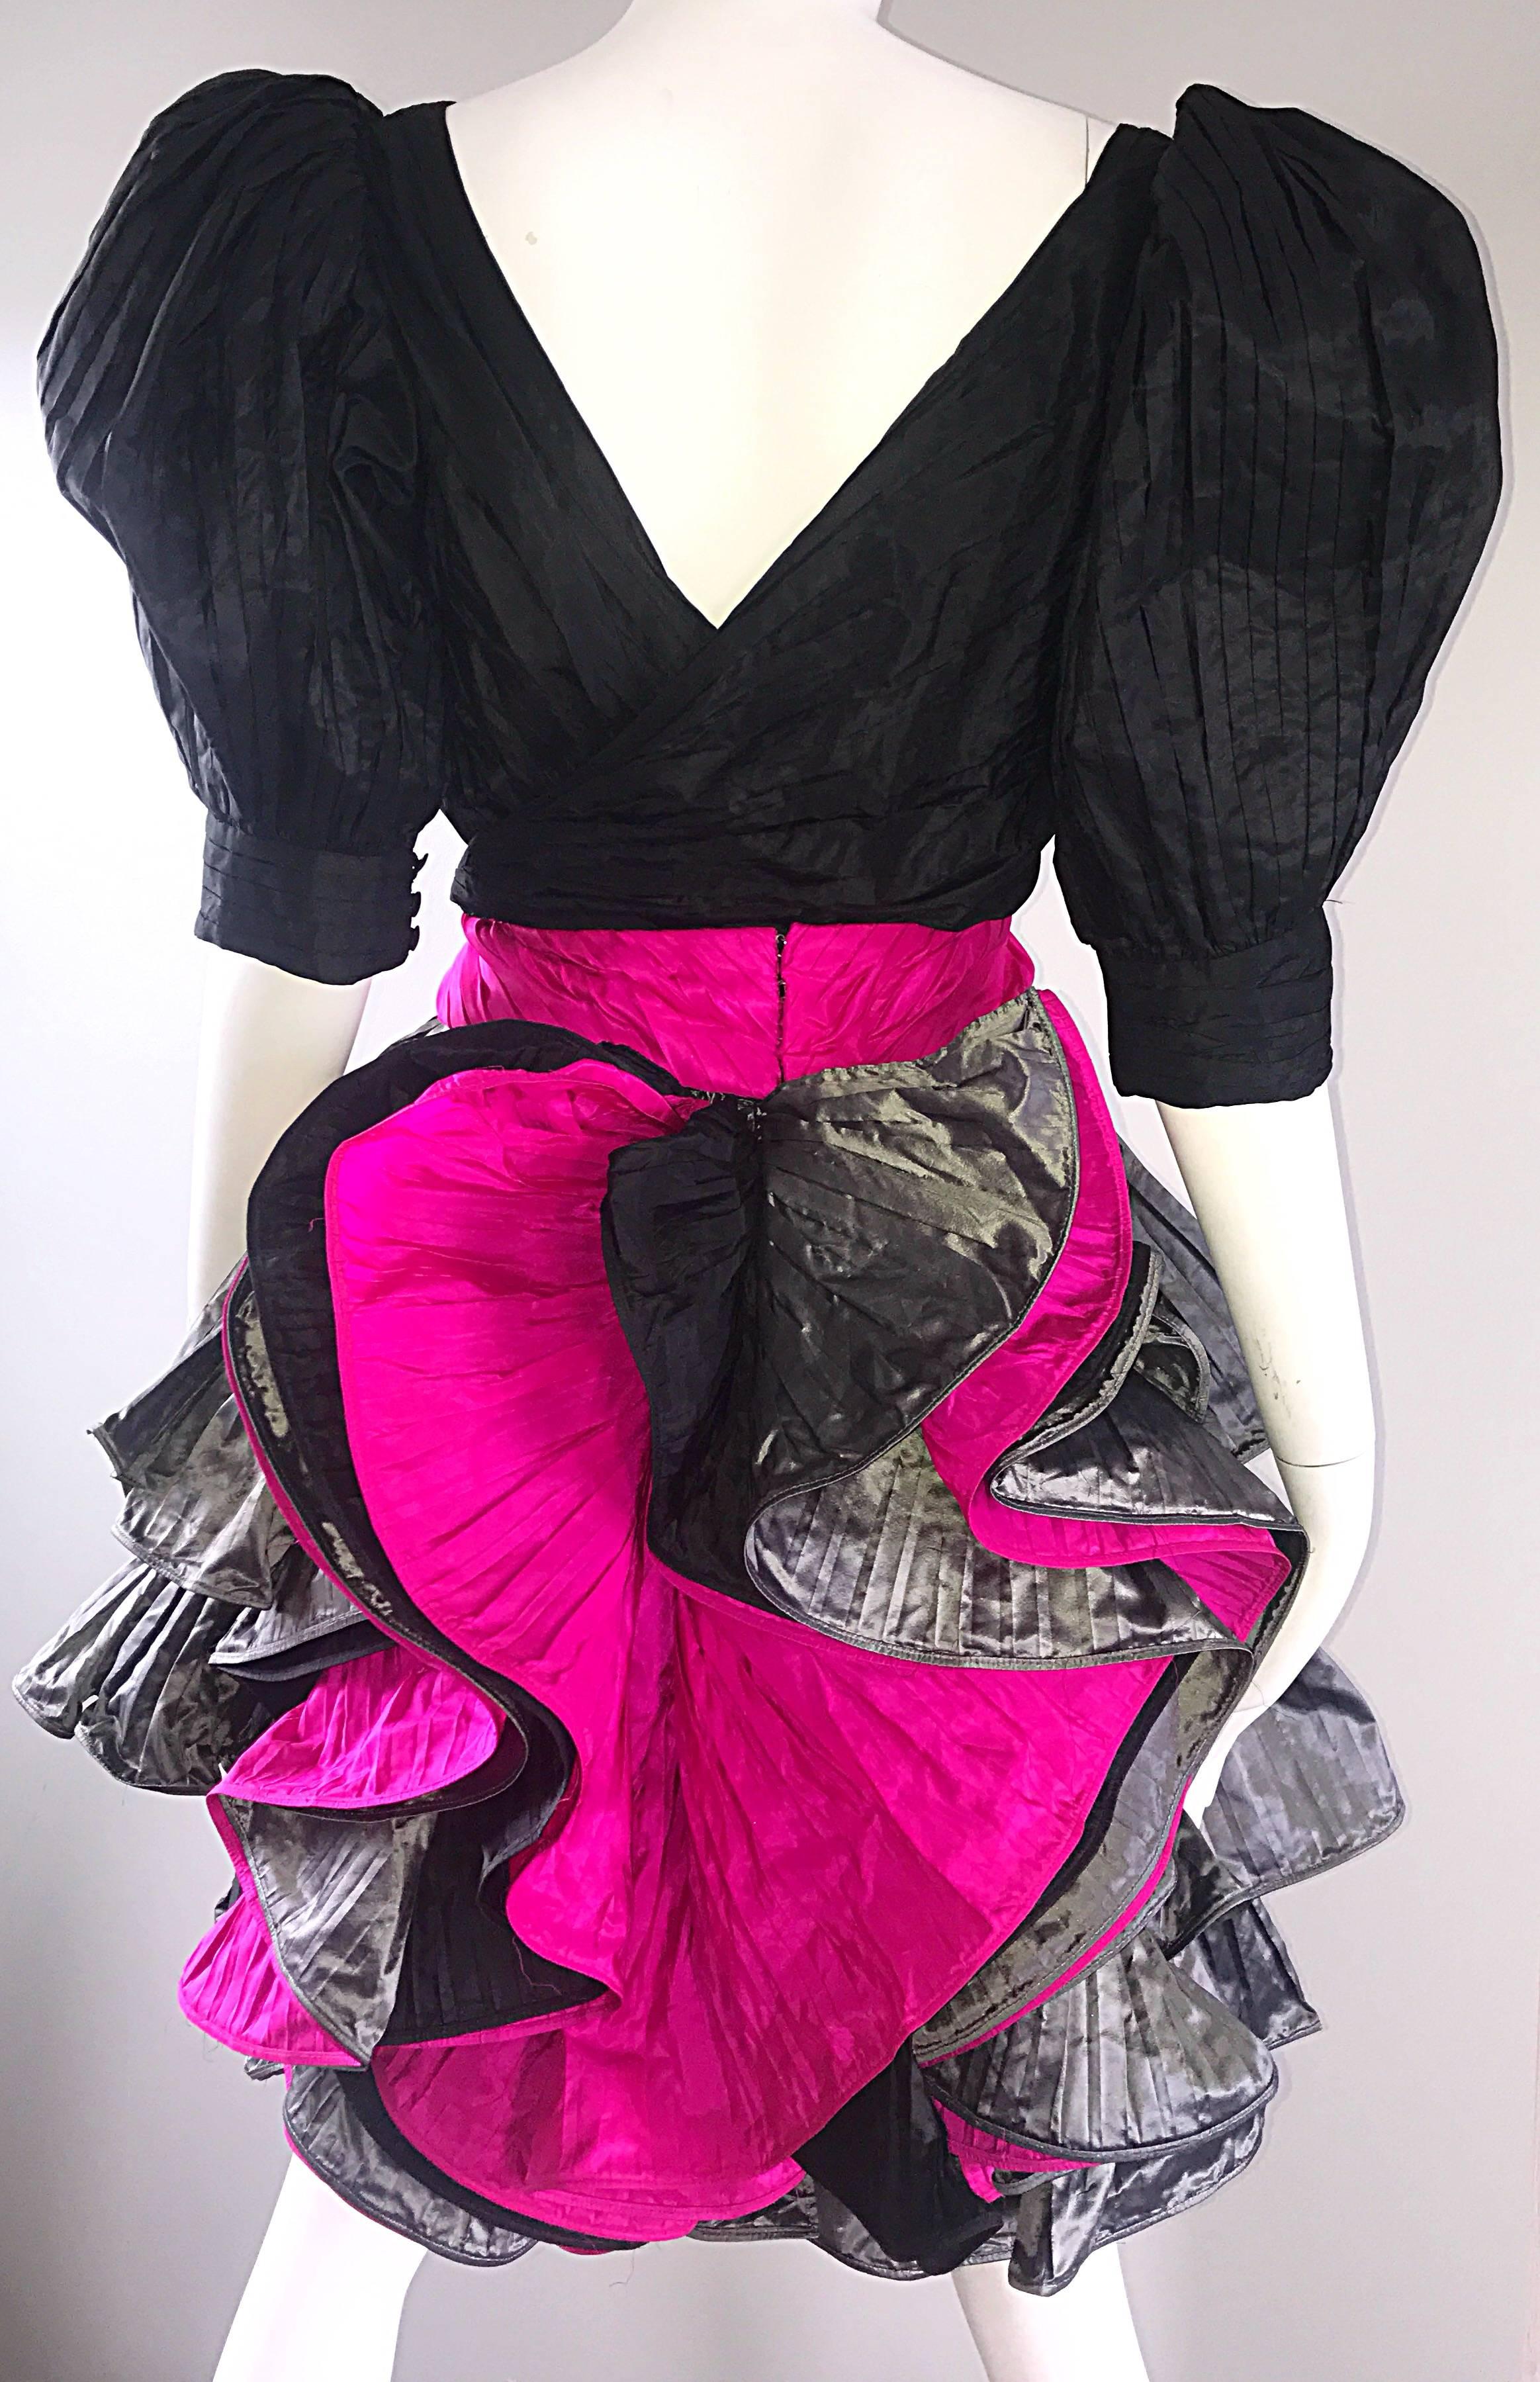 Sensational vintage PAUL LOUIS ORRIER Couture 1980s / 80s silk taffeta cocktail dress! Features a black fitted pleated bodice with Avant Garde puff sleeves. Attached hot pink fuchsia belt hooks closed in the back. Tiered shark gray accordion pleated